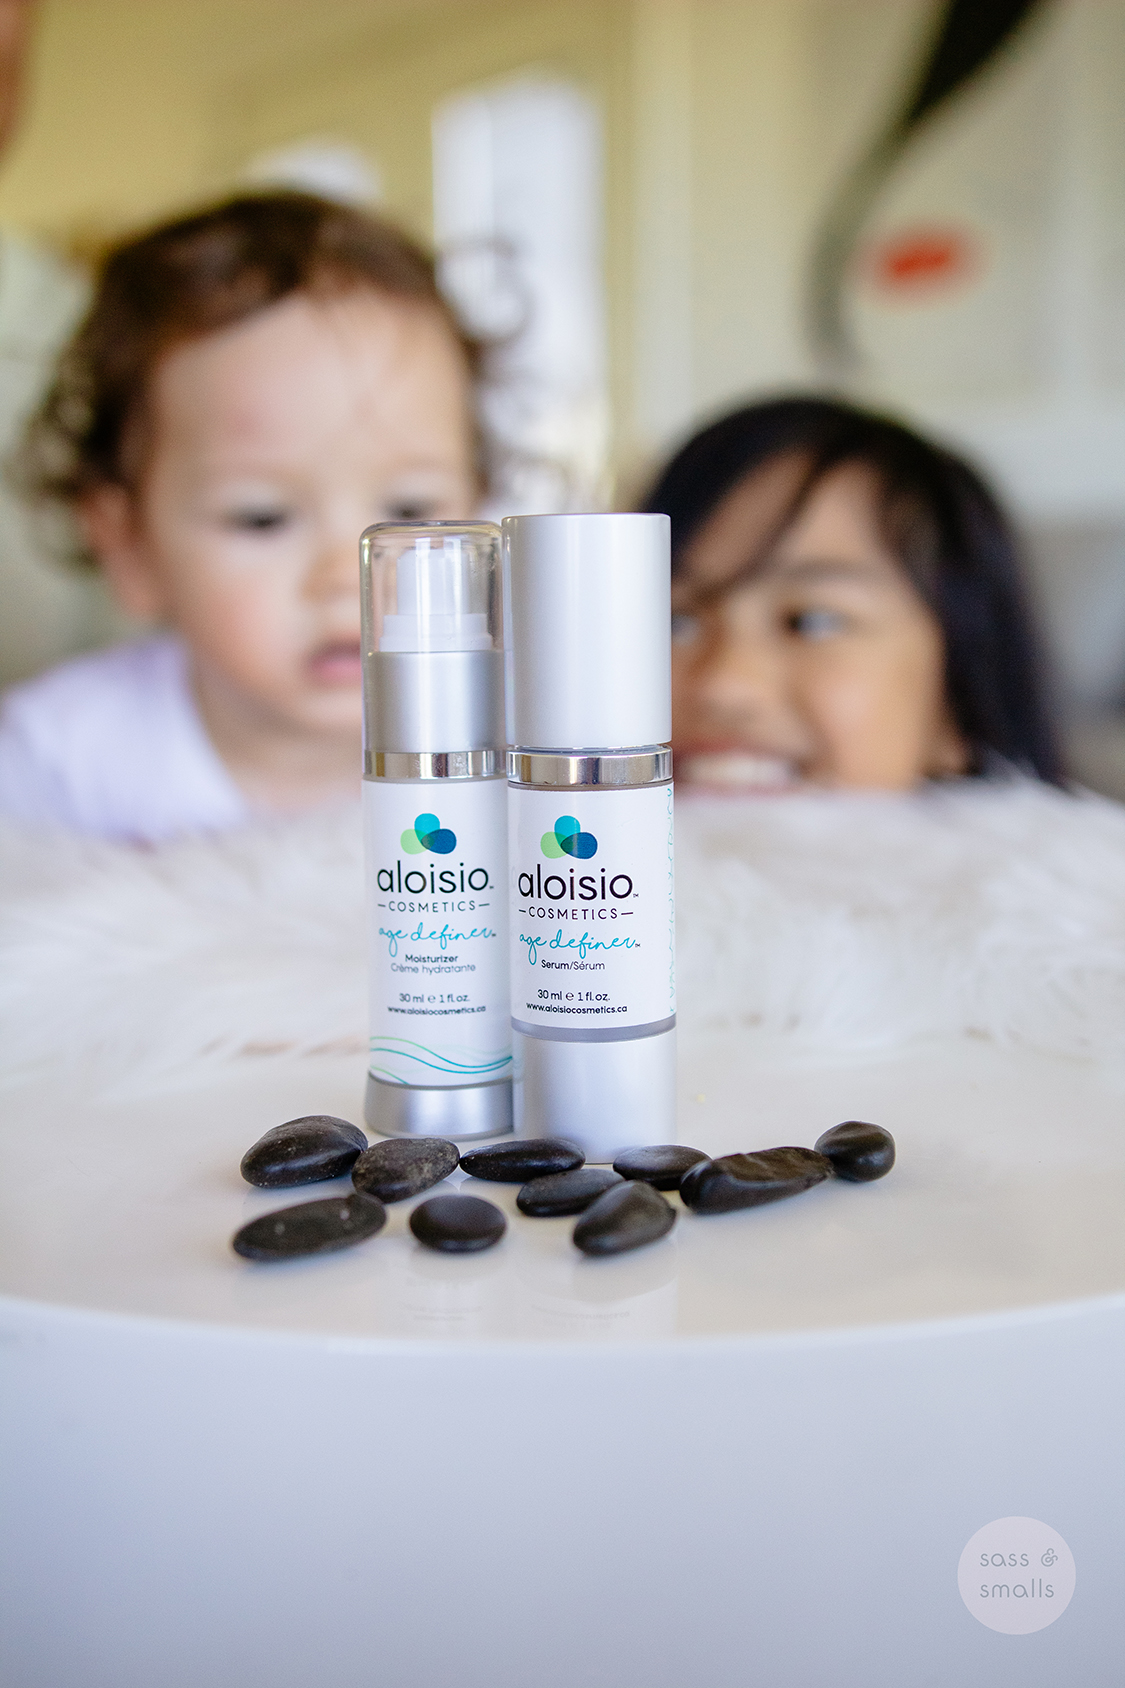 Age Definer Products for Tired Parents -- Aloisio Cosmetics Giveaway www.sassandsmalls.com